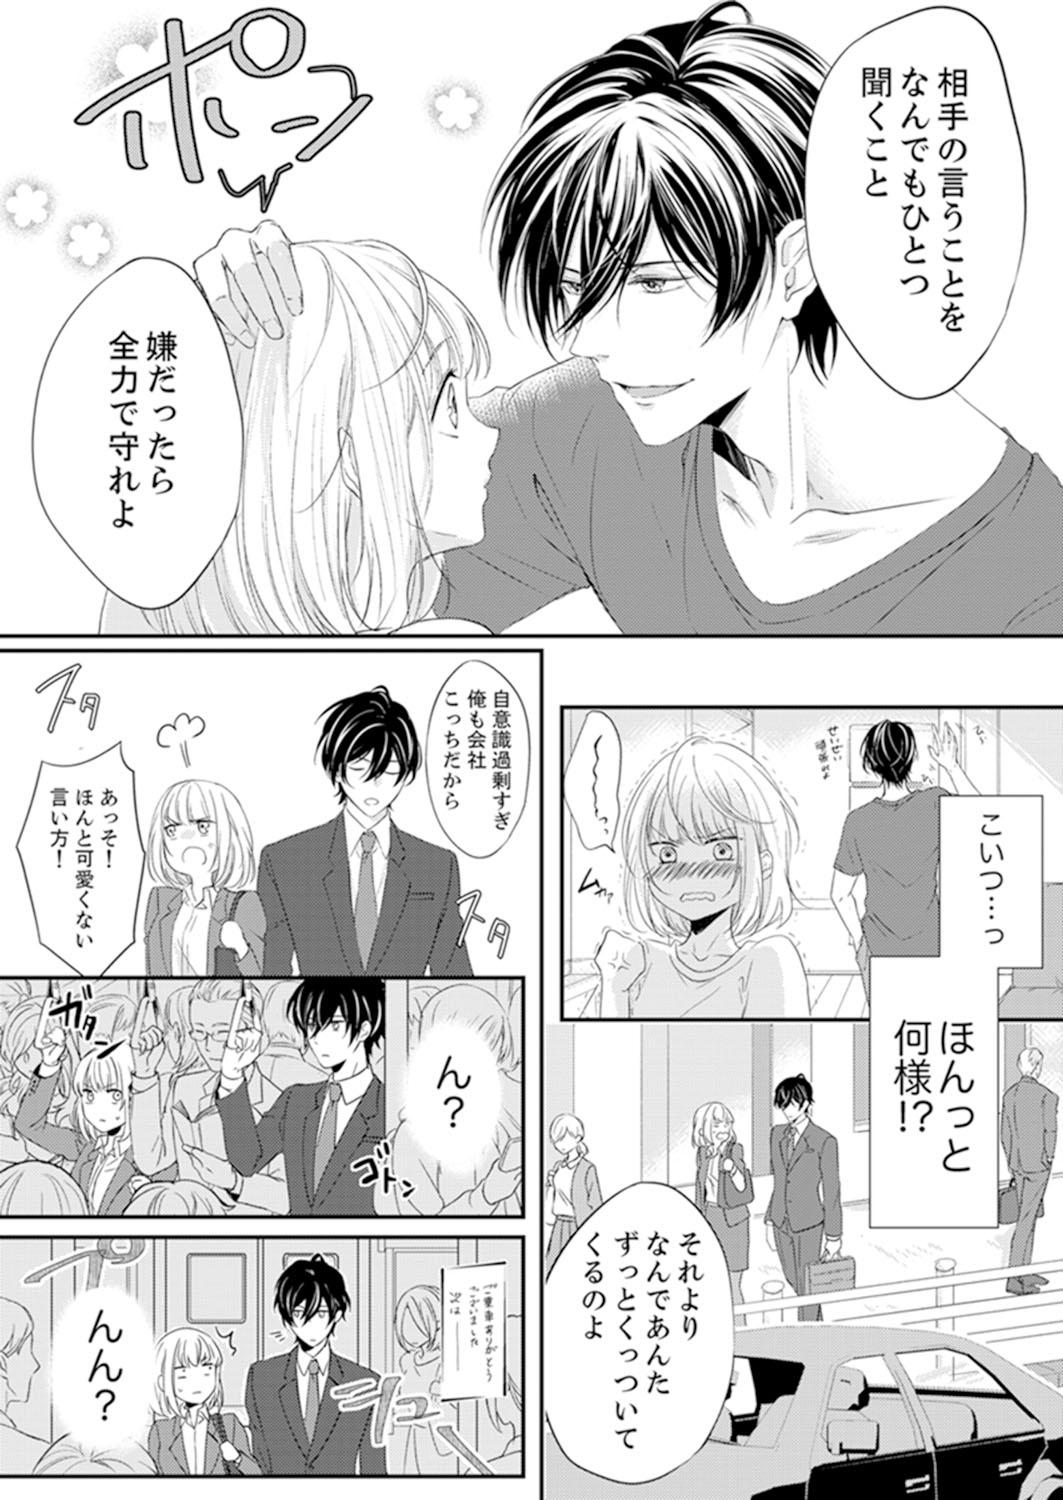 Metendo ルール違反はイクまでＨ!?～幼なじみと同居はじめました Ch.1-21 Dominicana - Page 11